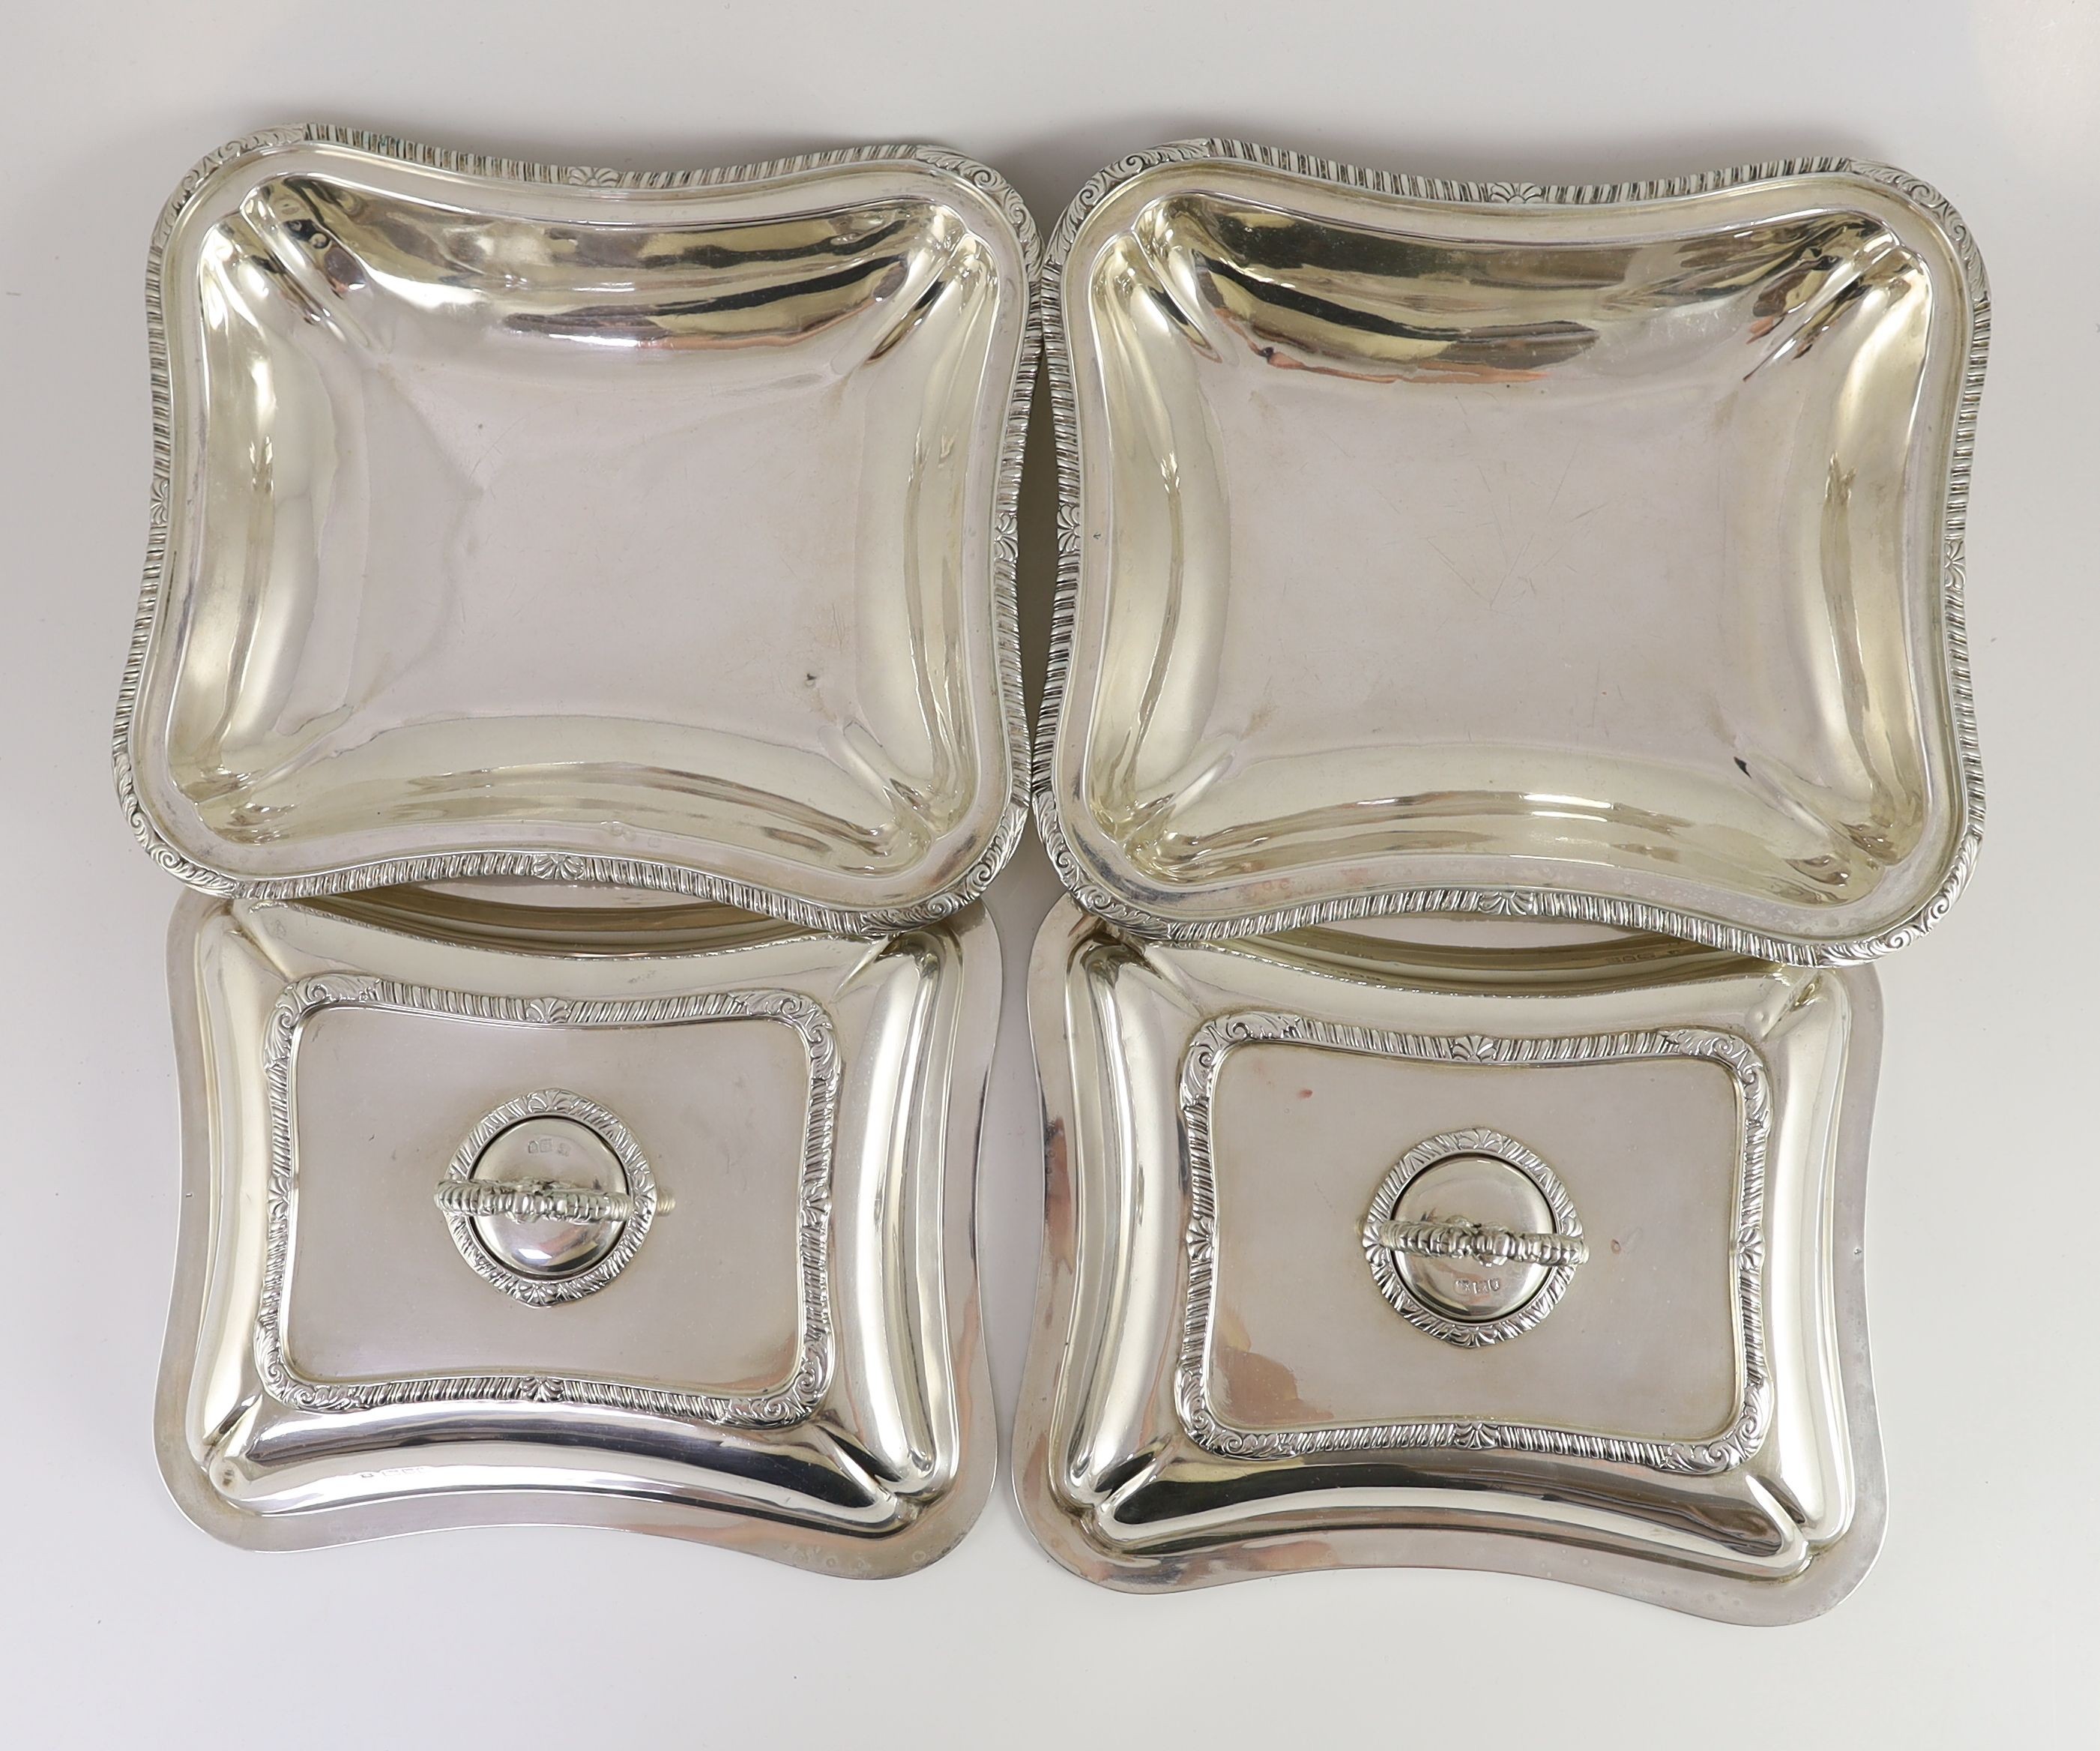 A pair of Edwardian silver tureens and cover with handles, by Daniel & John Welby